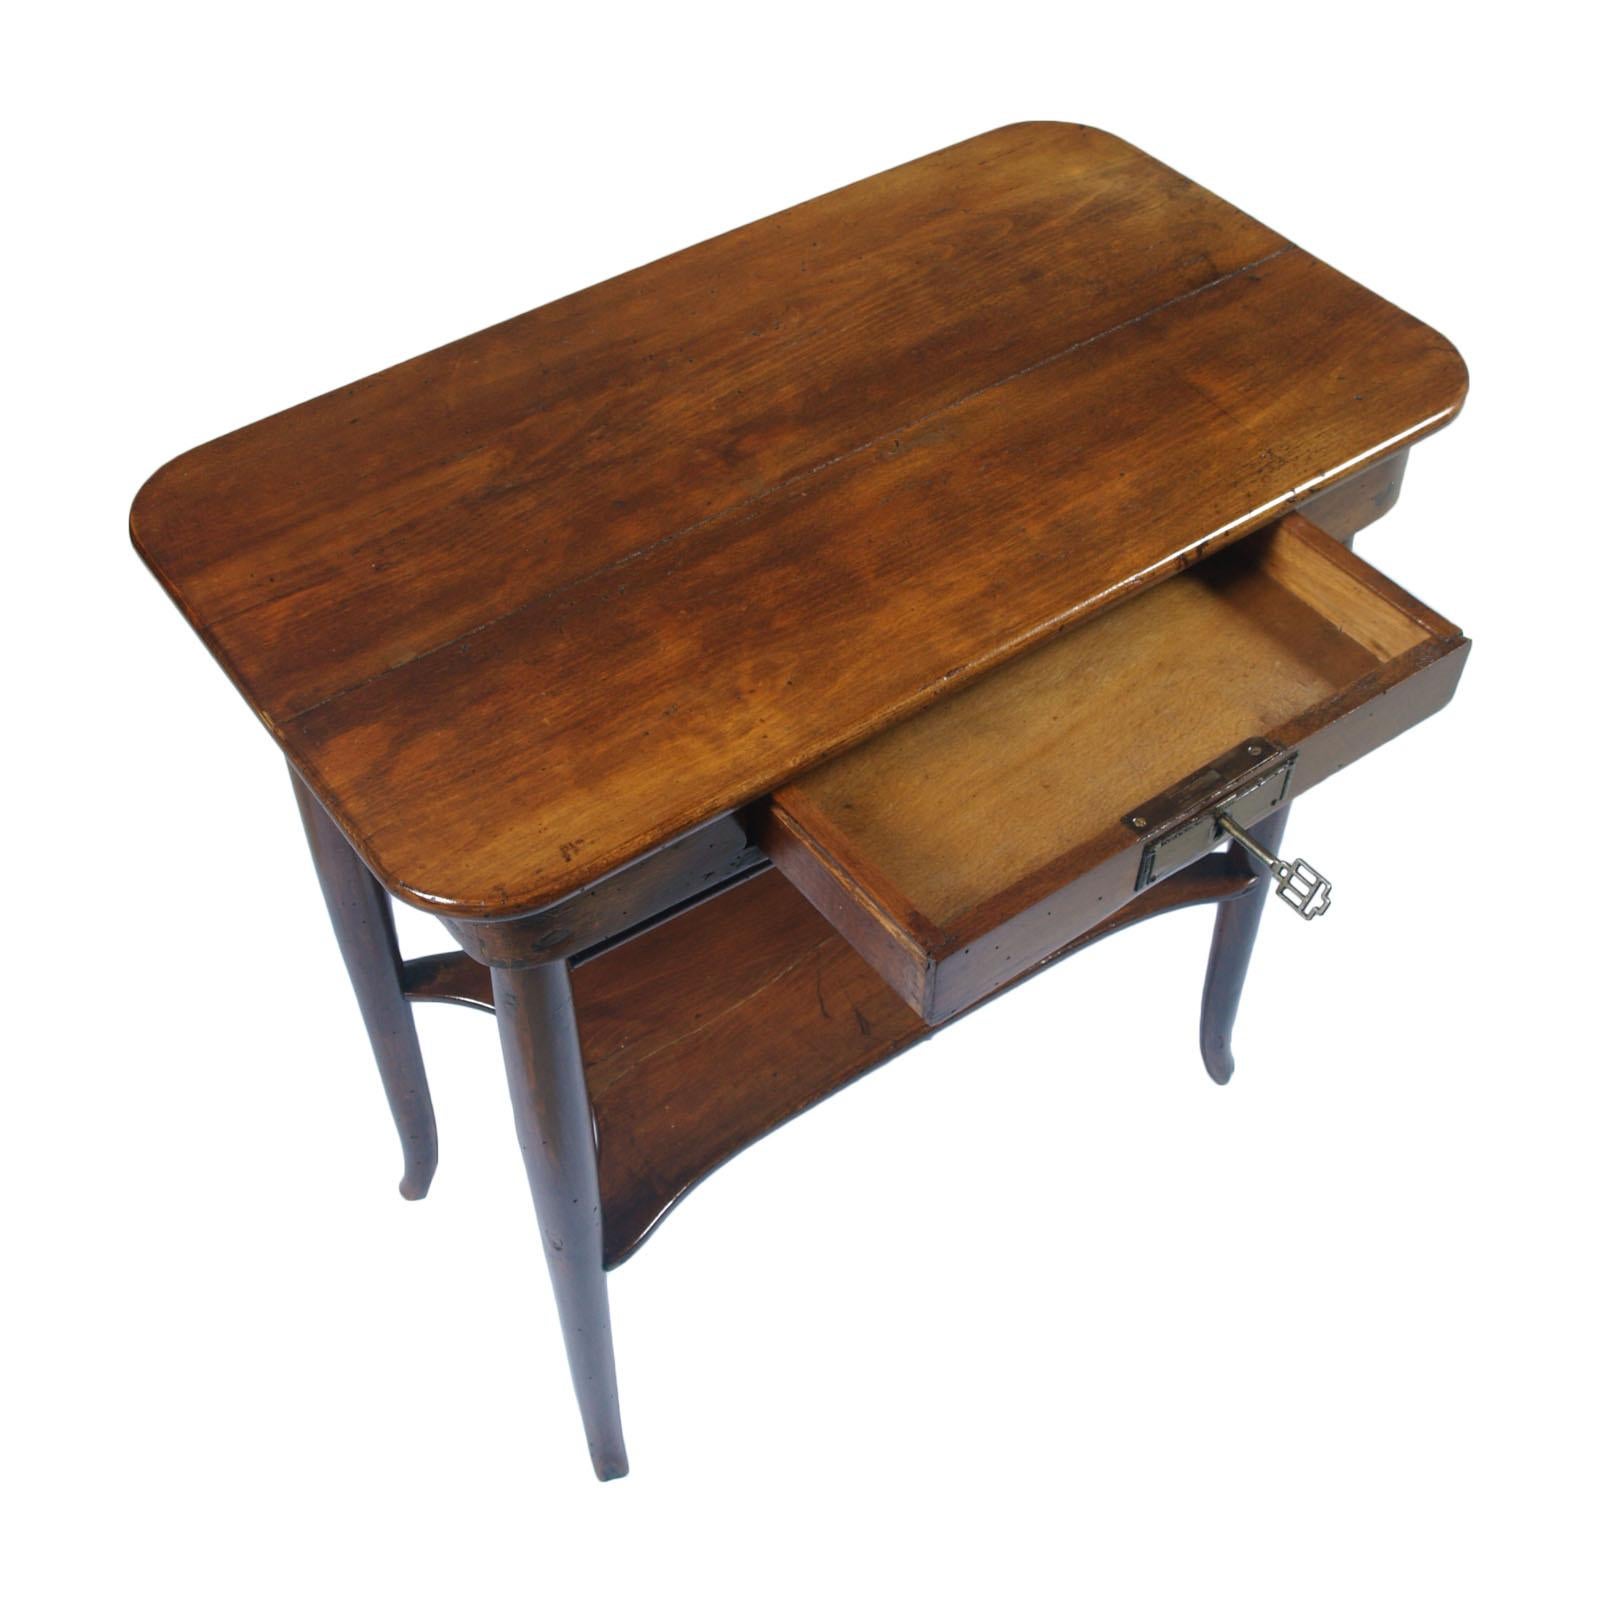 Tea table or side table or console or nightstand with drawer, all solid wood of walnut, restored and wax polished, circa 1900s.
Manufacturer: Jacob and Josef Kohn (label). Joseph Hoffman designer, Austria, Vienna.

Measures cm: H 70, W 66, D 37